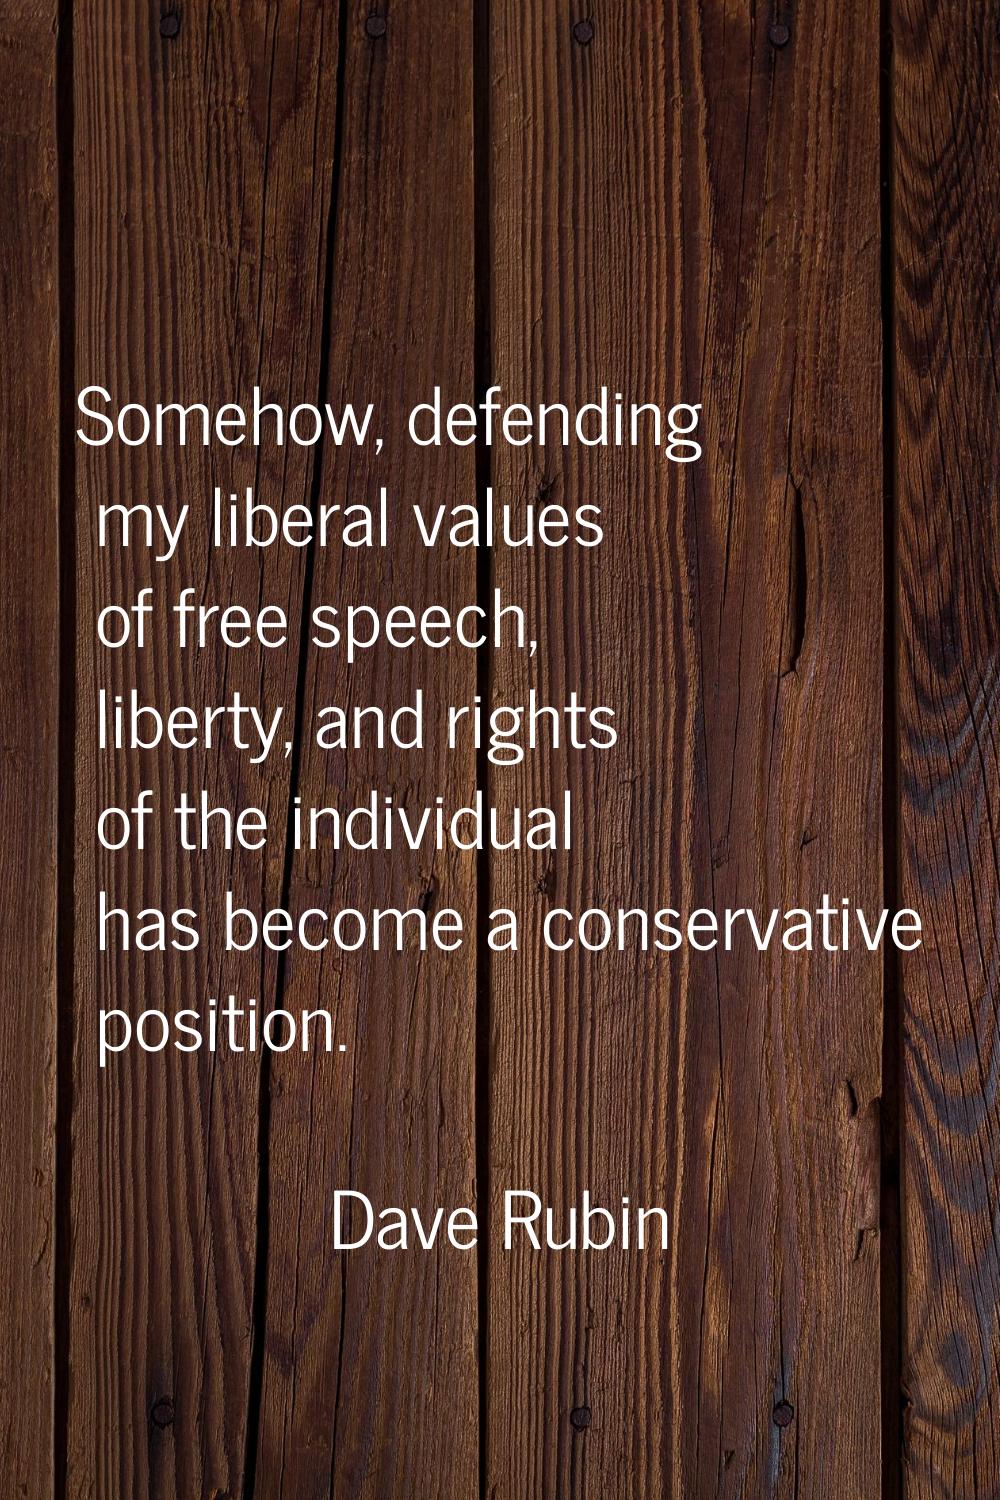 Somehow, defending my liberal values of free speech, liberty, and rights of the individual has beco